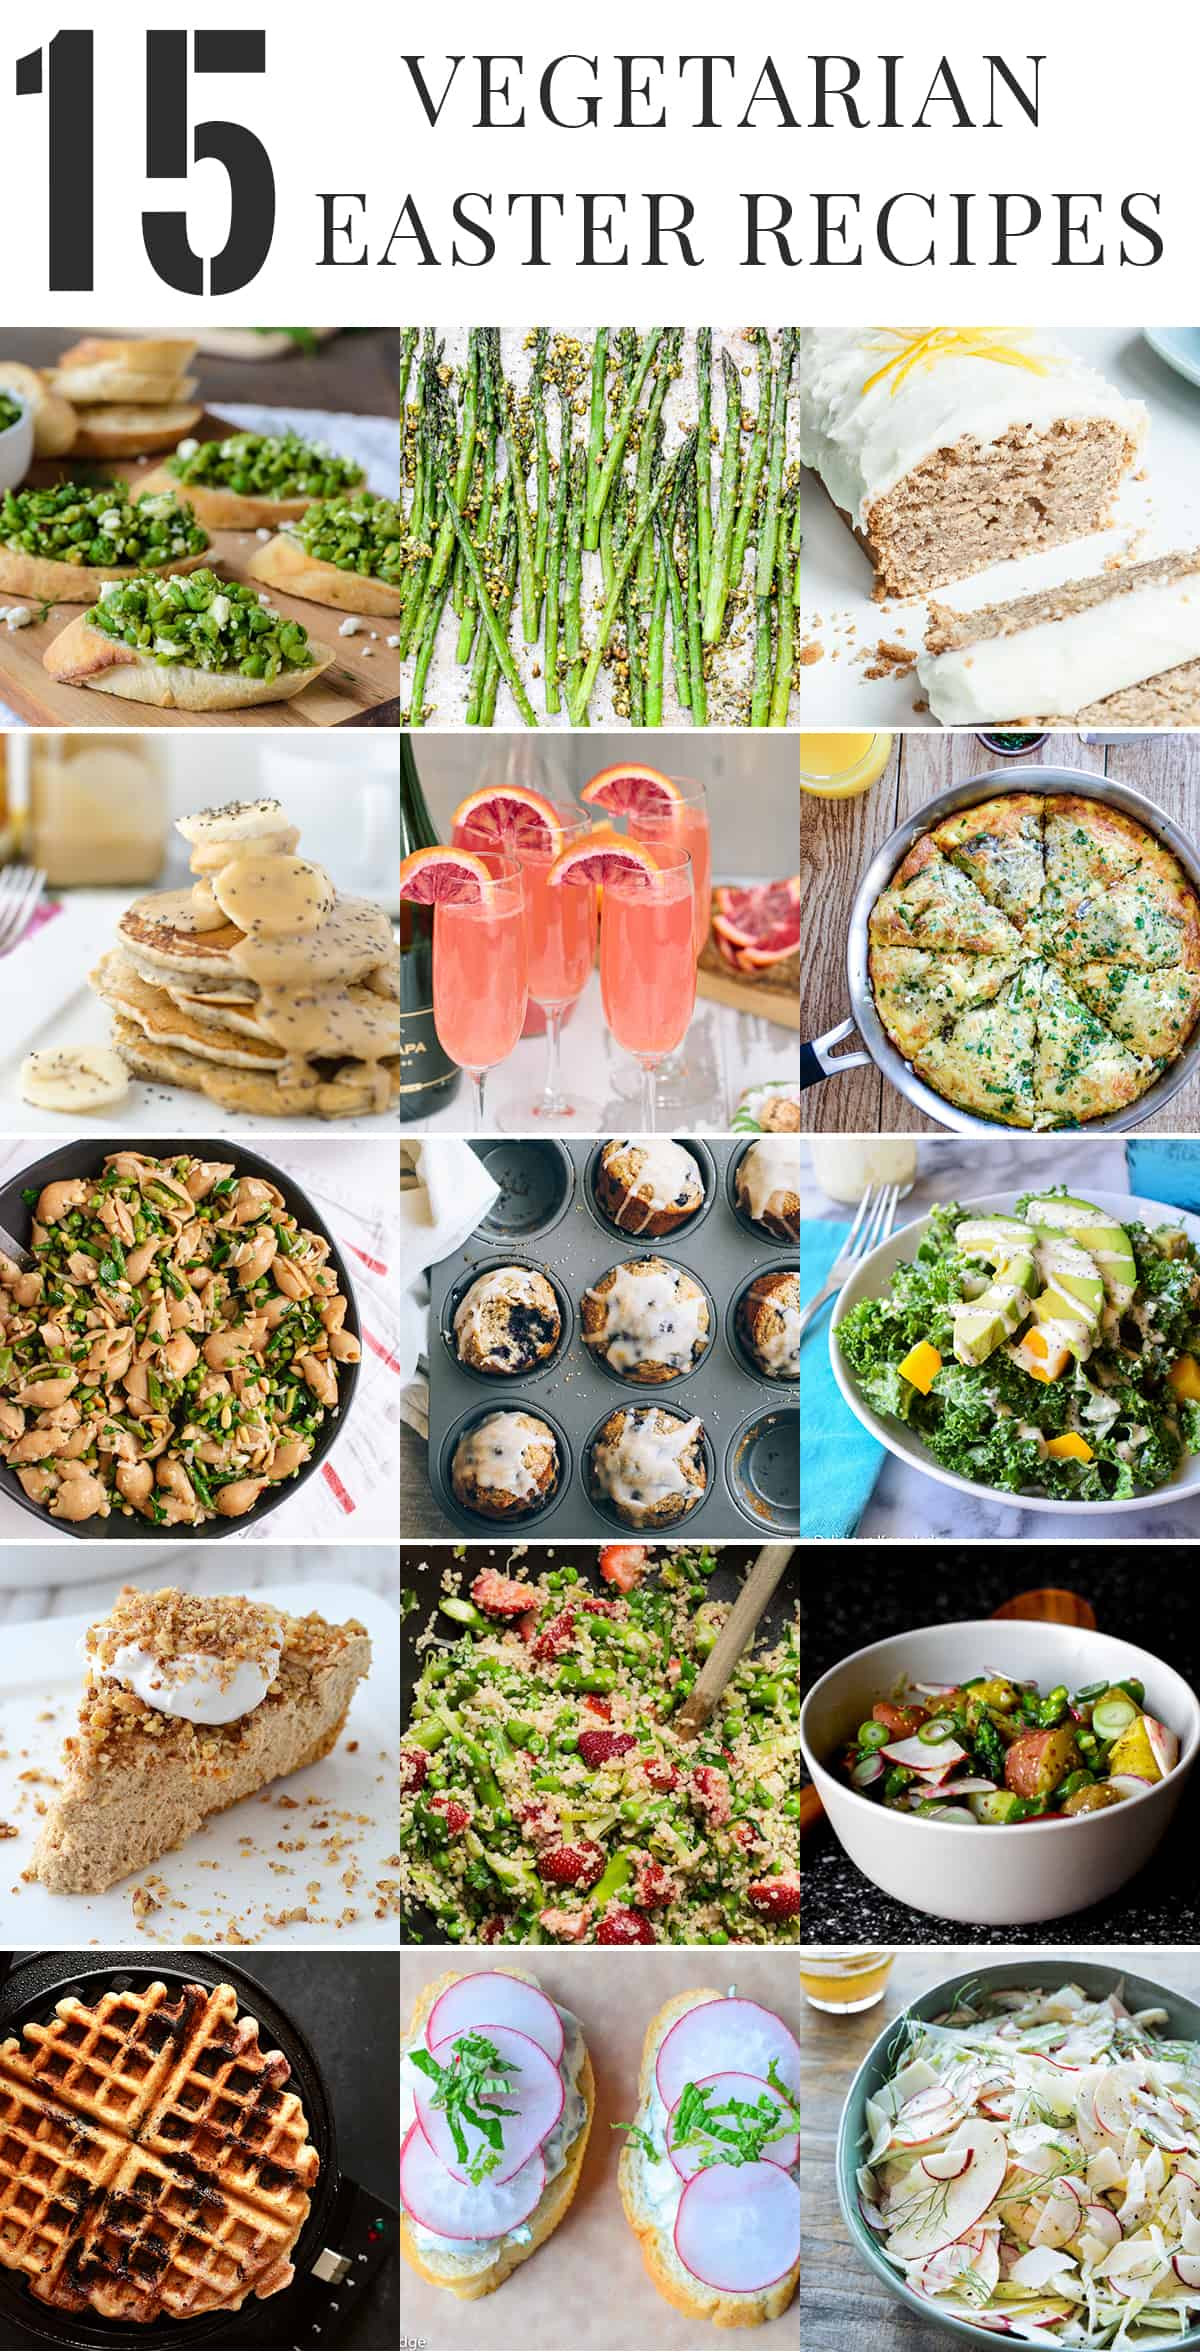 Vegetarian Easter Dinner Ideas
 Healthy Ve arian Easter Recipes Delish Knowledge